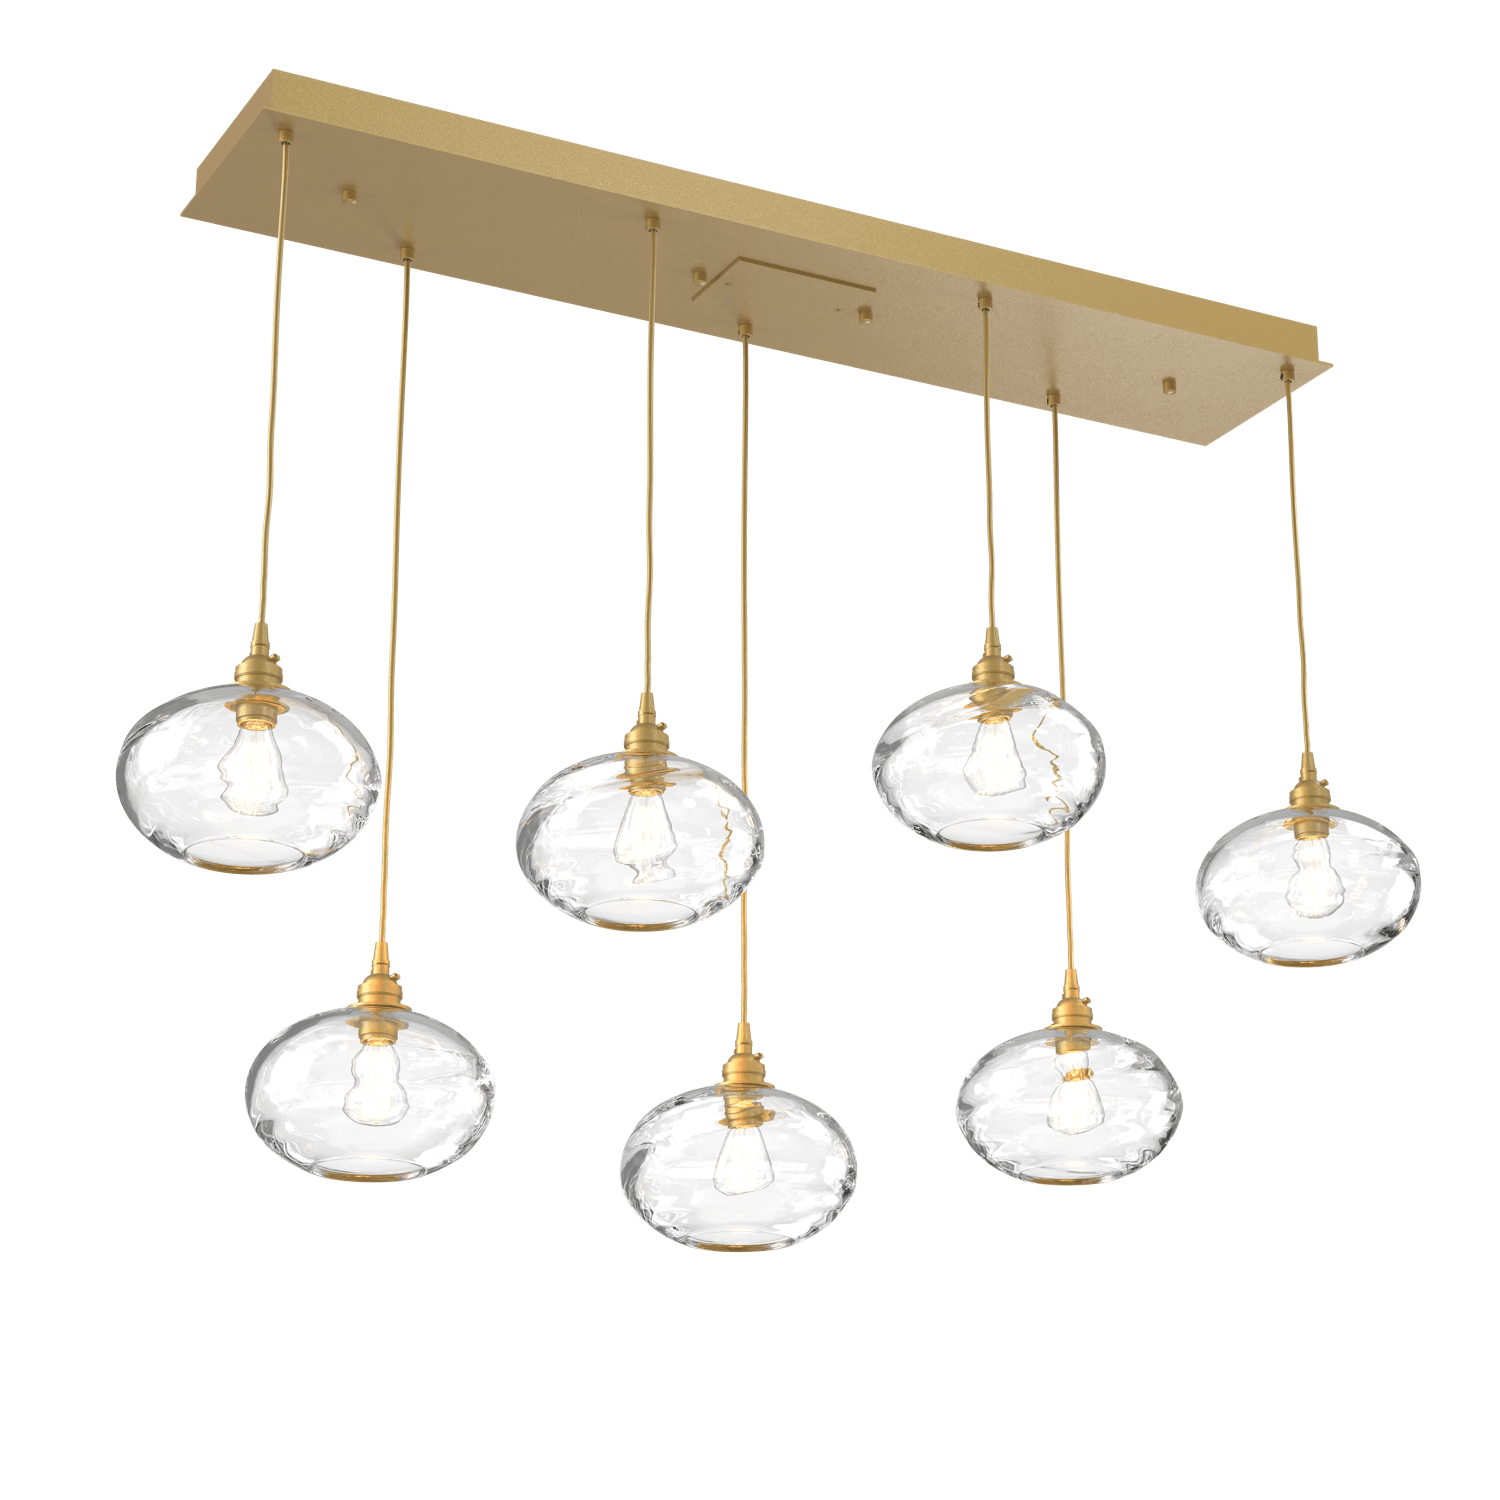 PLB0036-07-GB-OC-Hammerton-Studio-Optic-Blown-Glass-Coppa-7-light-linear-pendant-chandelier-with-gilded-brass-finish-and-optic-clear-blown-glass-shades-and-incandescent-lamping